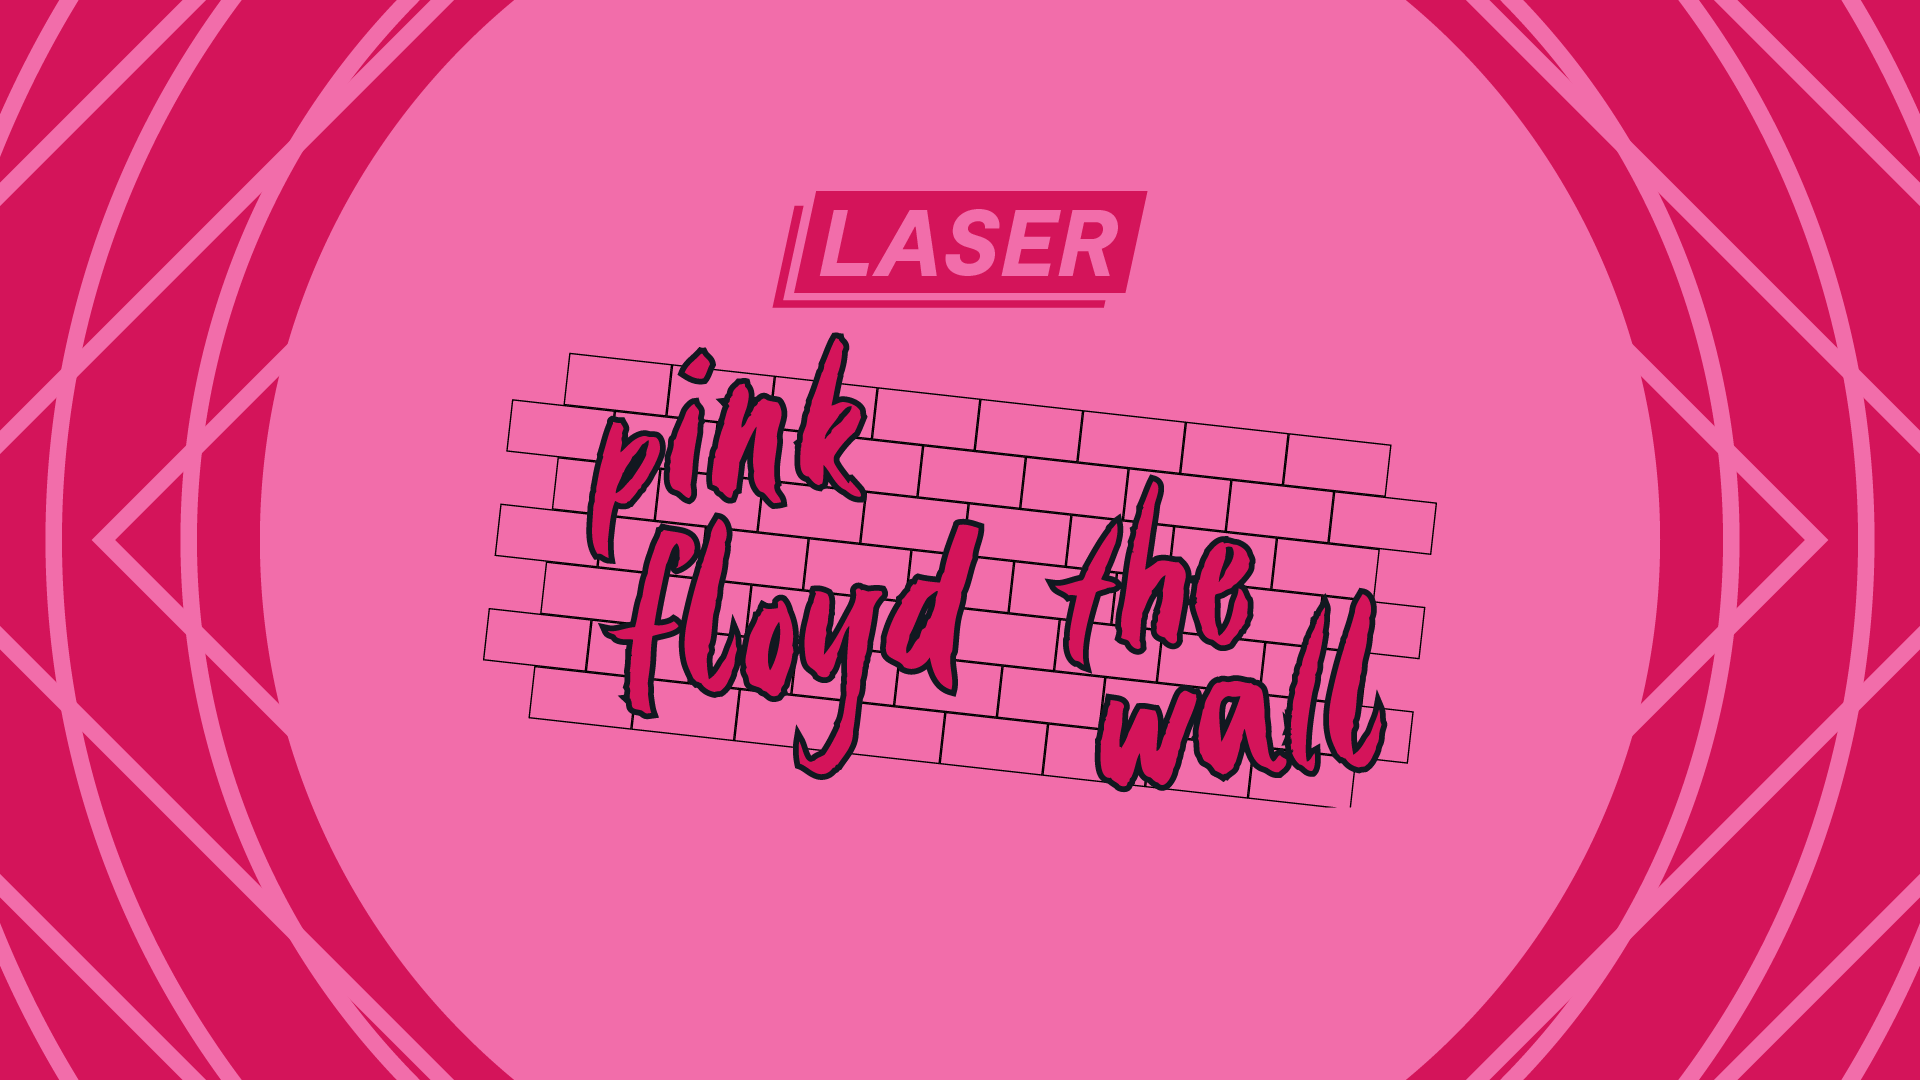 Laser Pink Floyd The Wall - Pacific Science Center